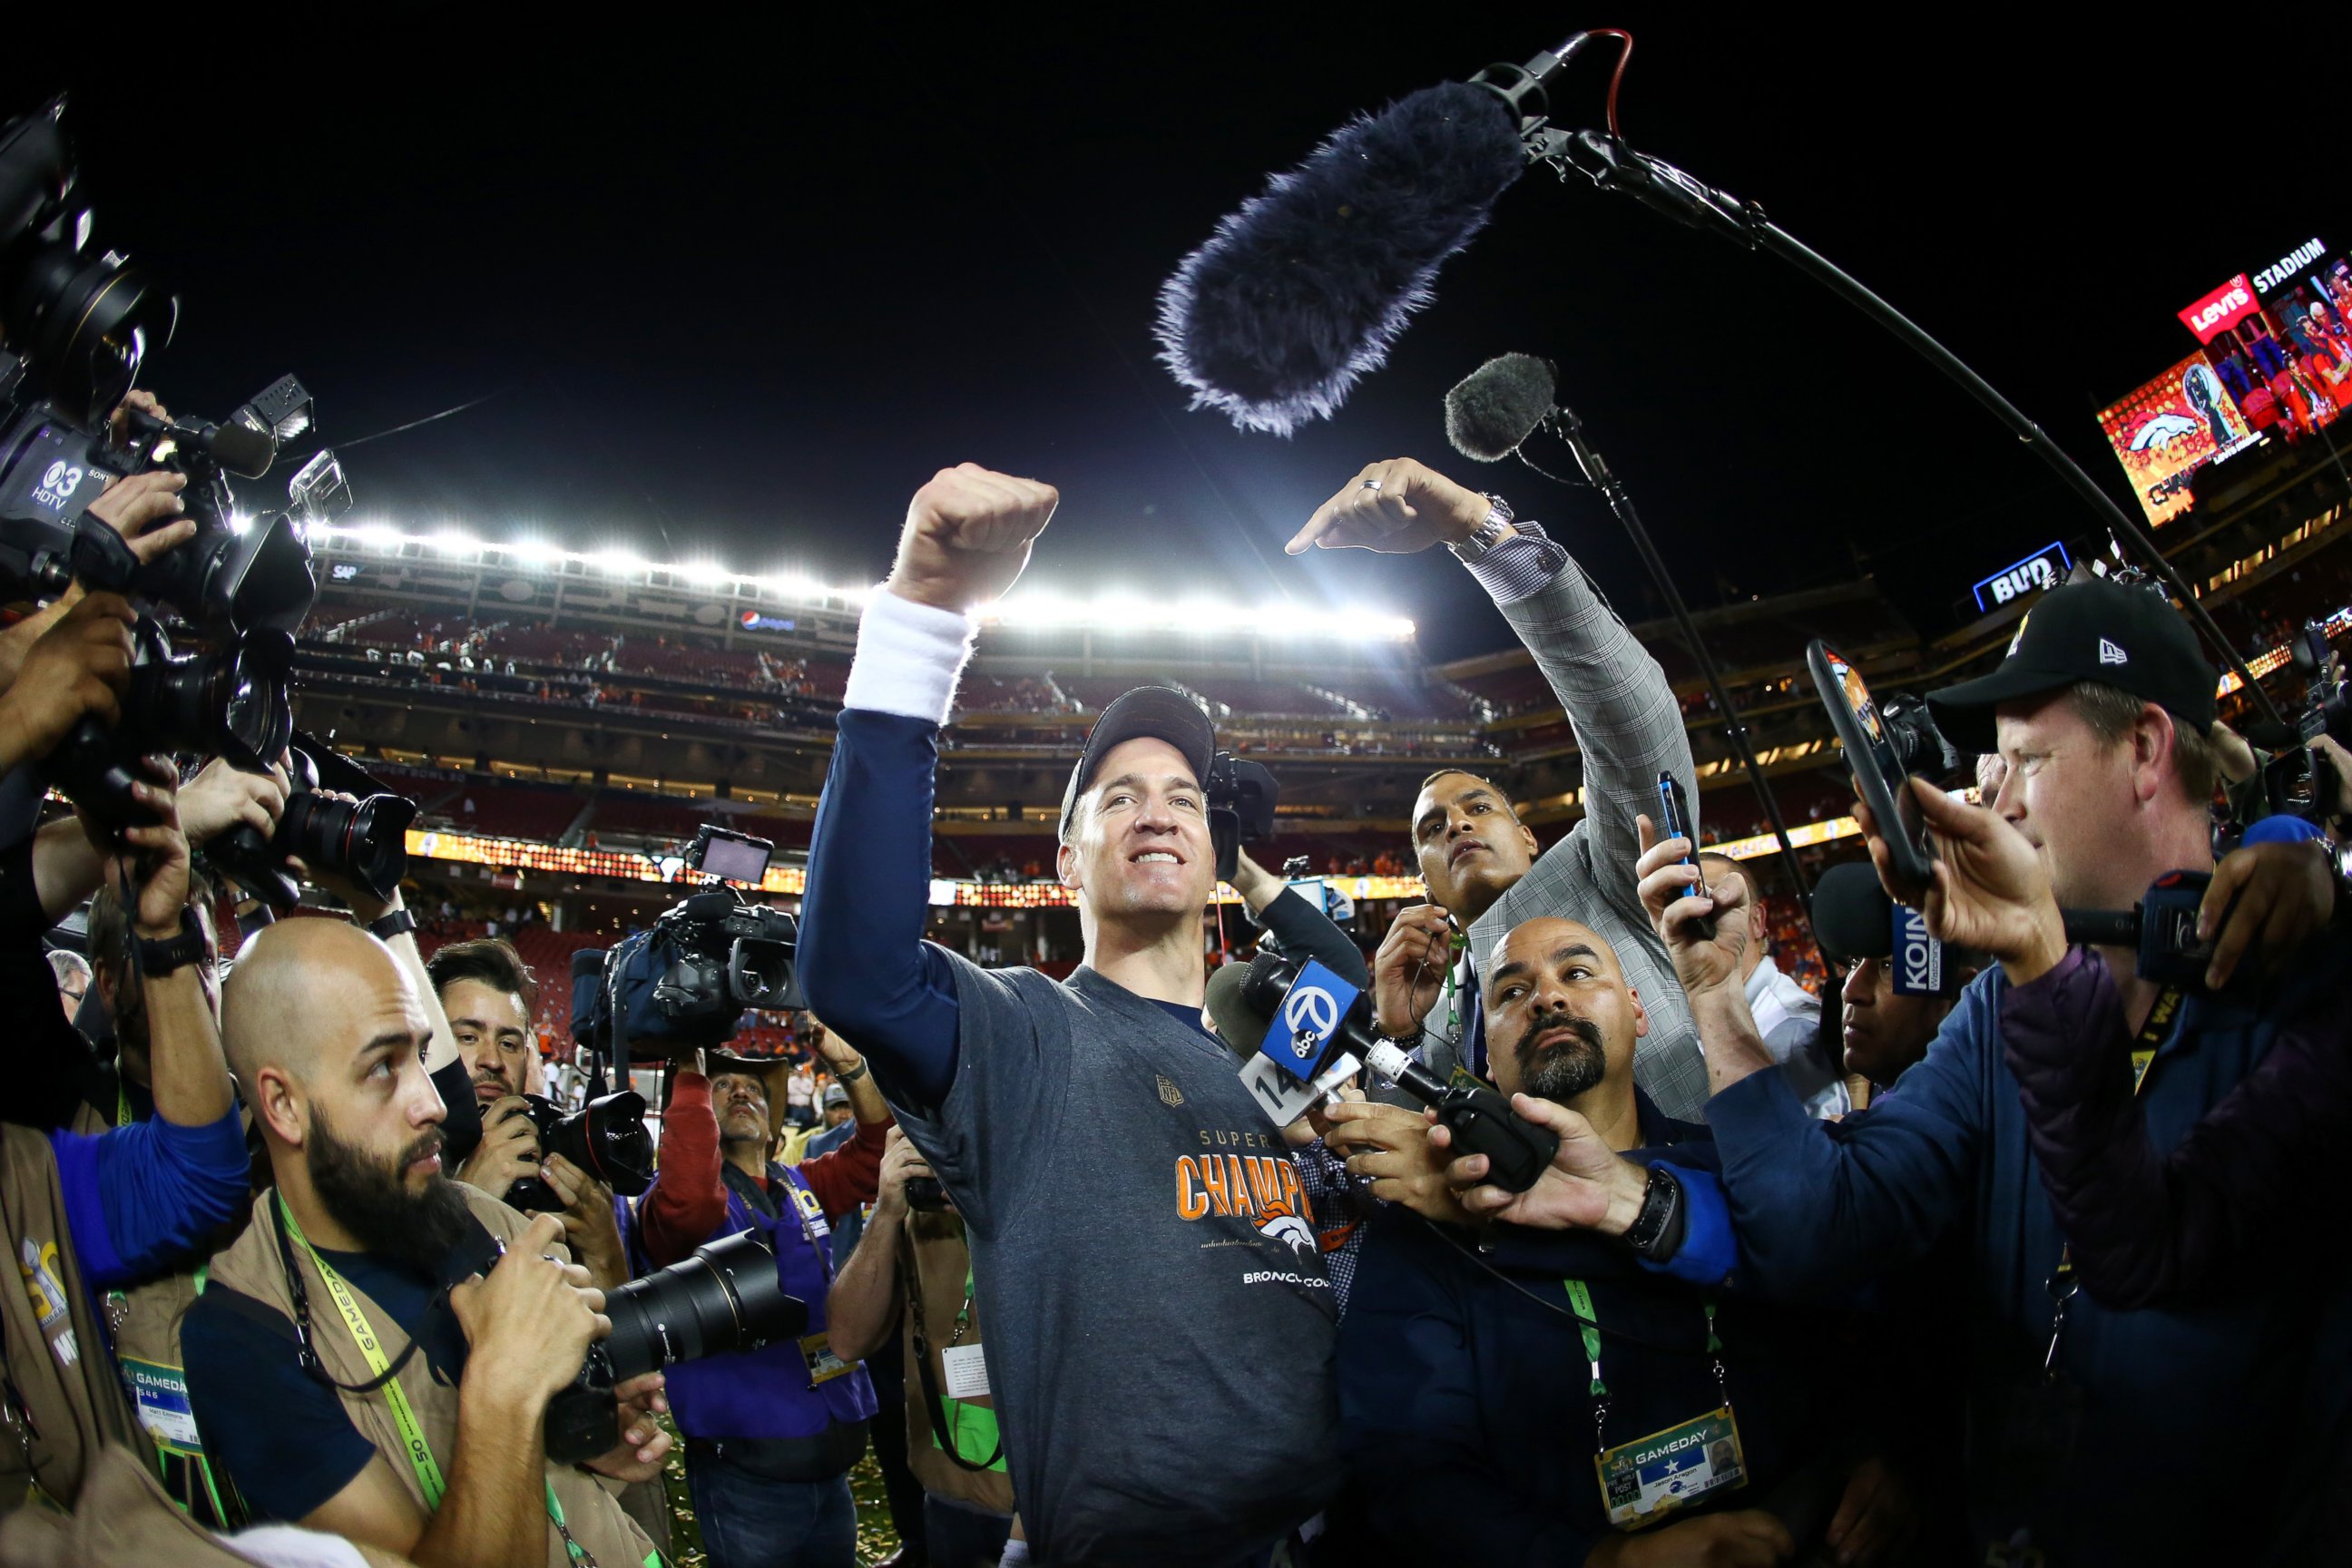 PHOTO: Peyton Manning of the Denver Broncos after Super Bowl 50 at Levi's Stadium on Feb. 7, 2016 in Santa Clara, California. The Broncos defeated the Panthers 24-10.